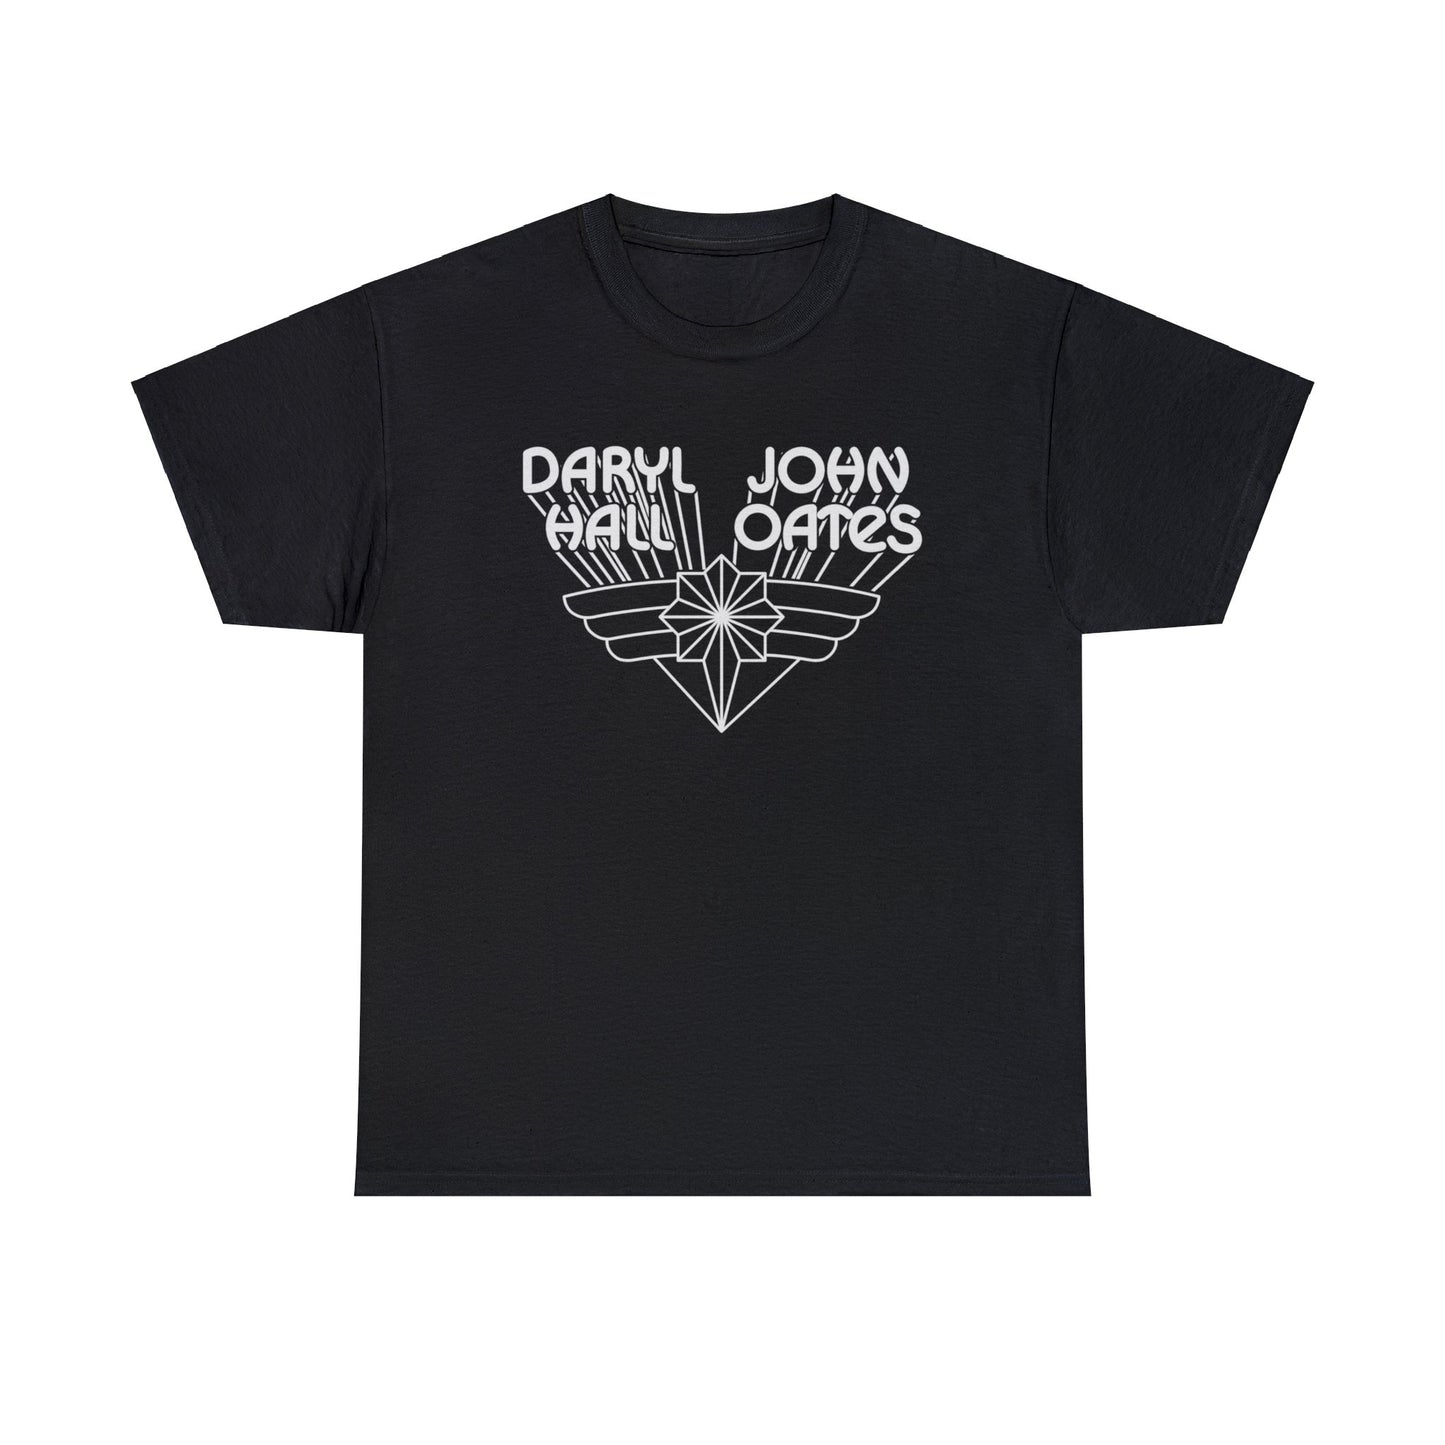 Daryl Hall and John Oates 1978 T-shirt for Sale